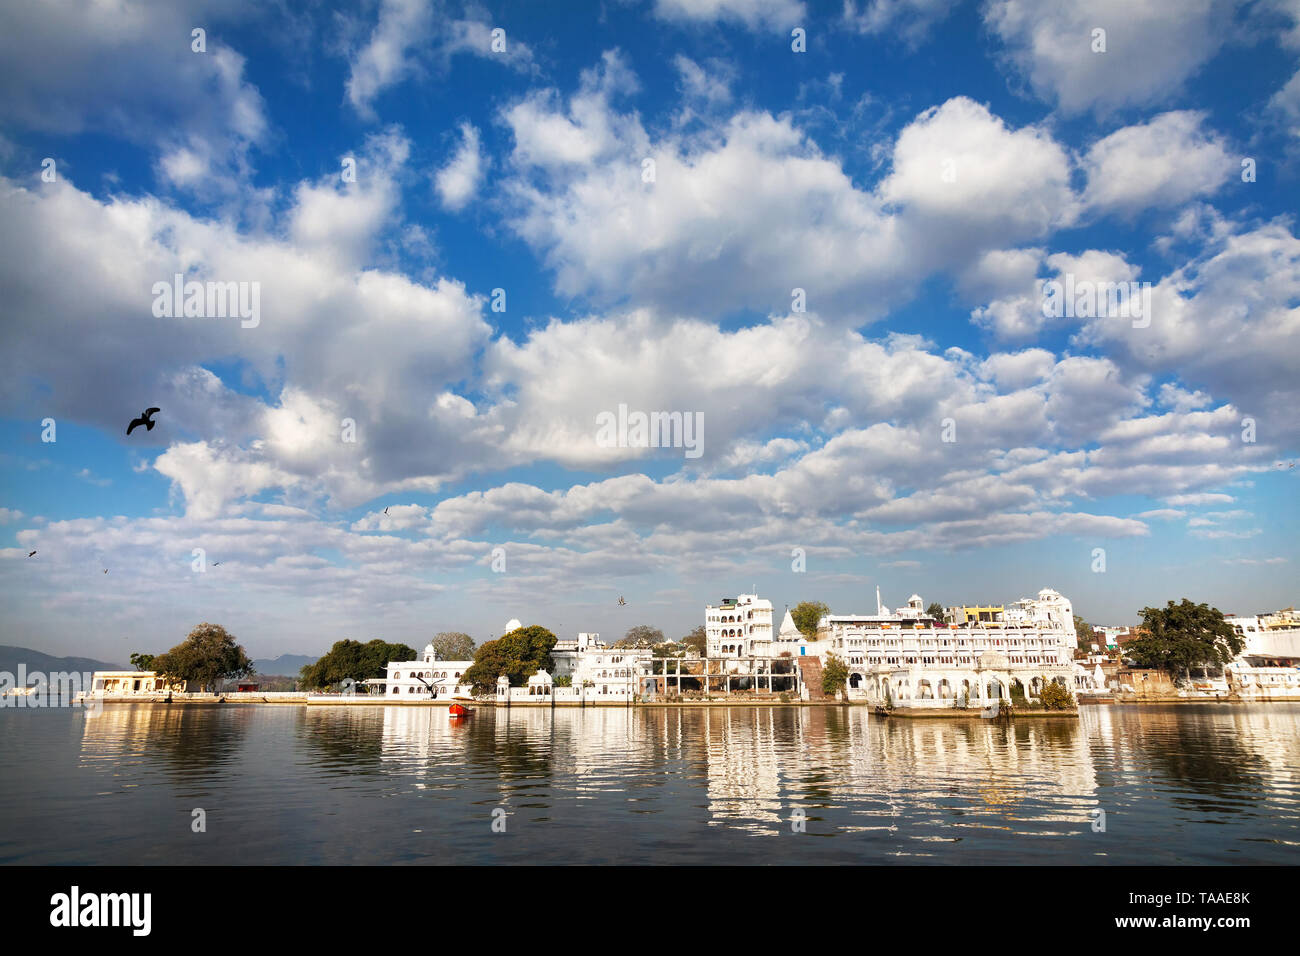 Lake Pichola with City Palace view at cloudy sky in Udaipur, Rajasthan, India Stock Photo